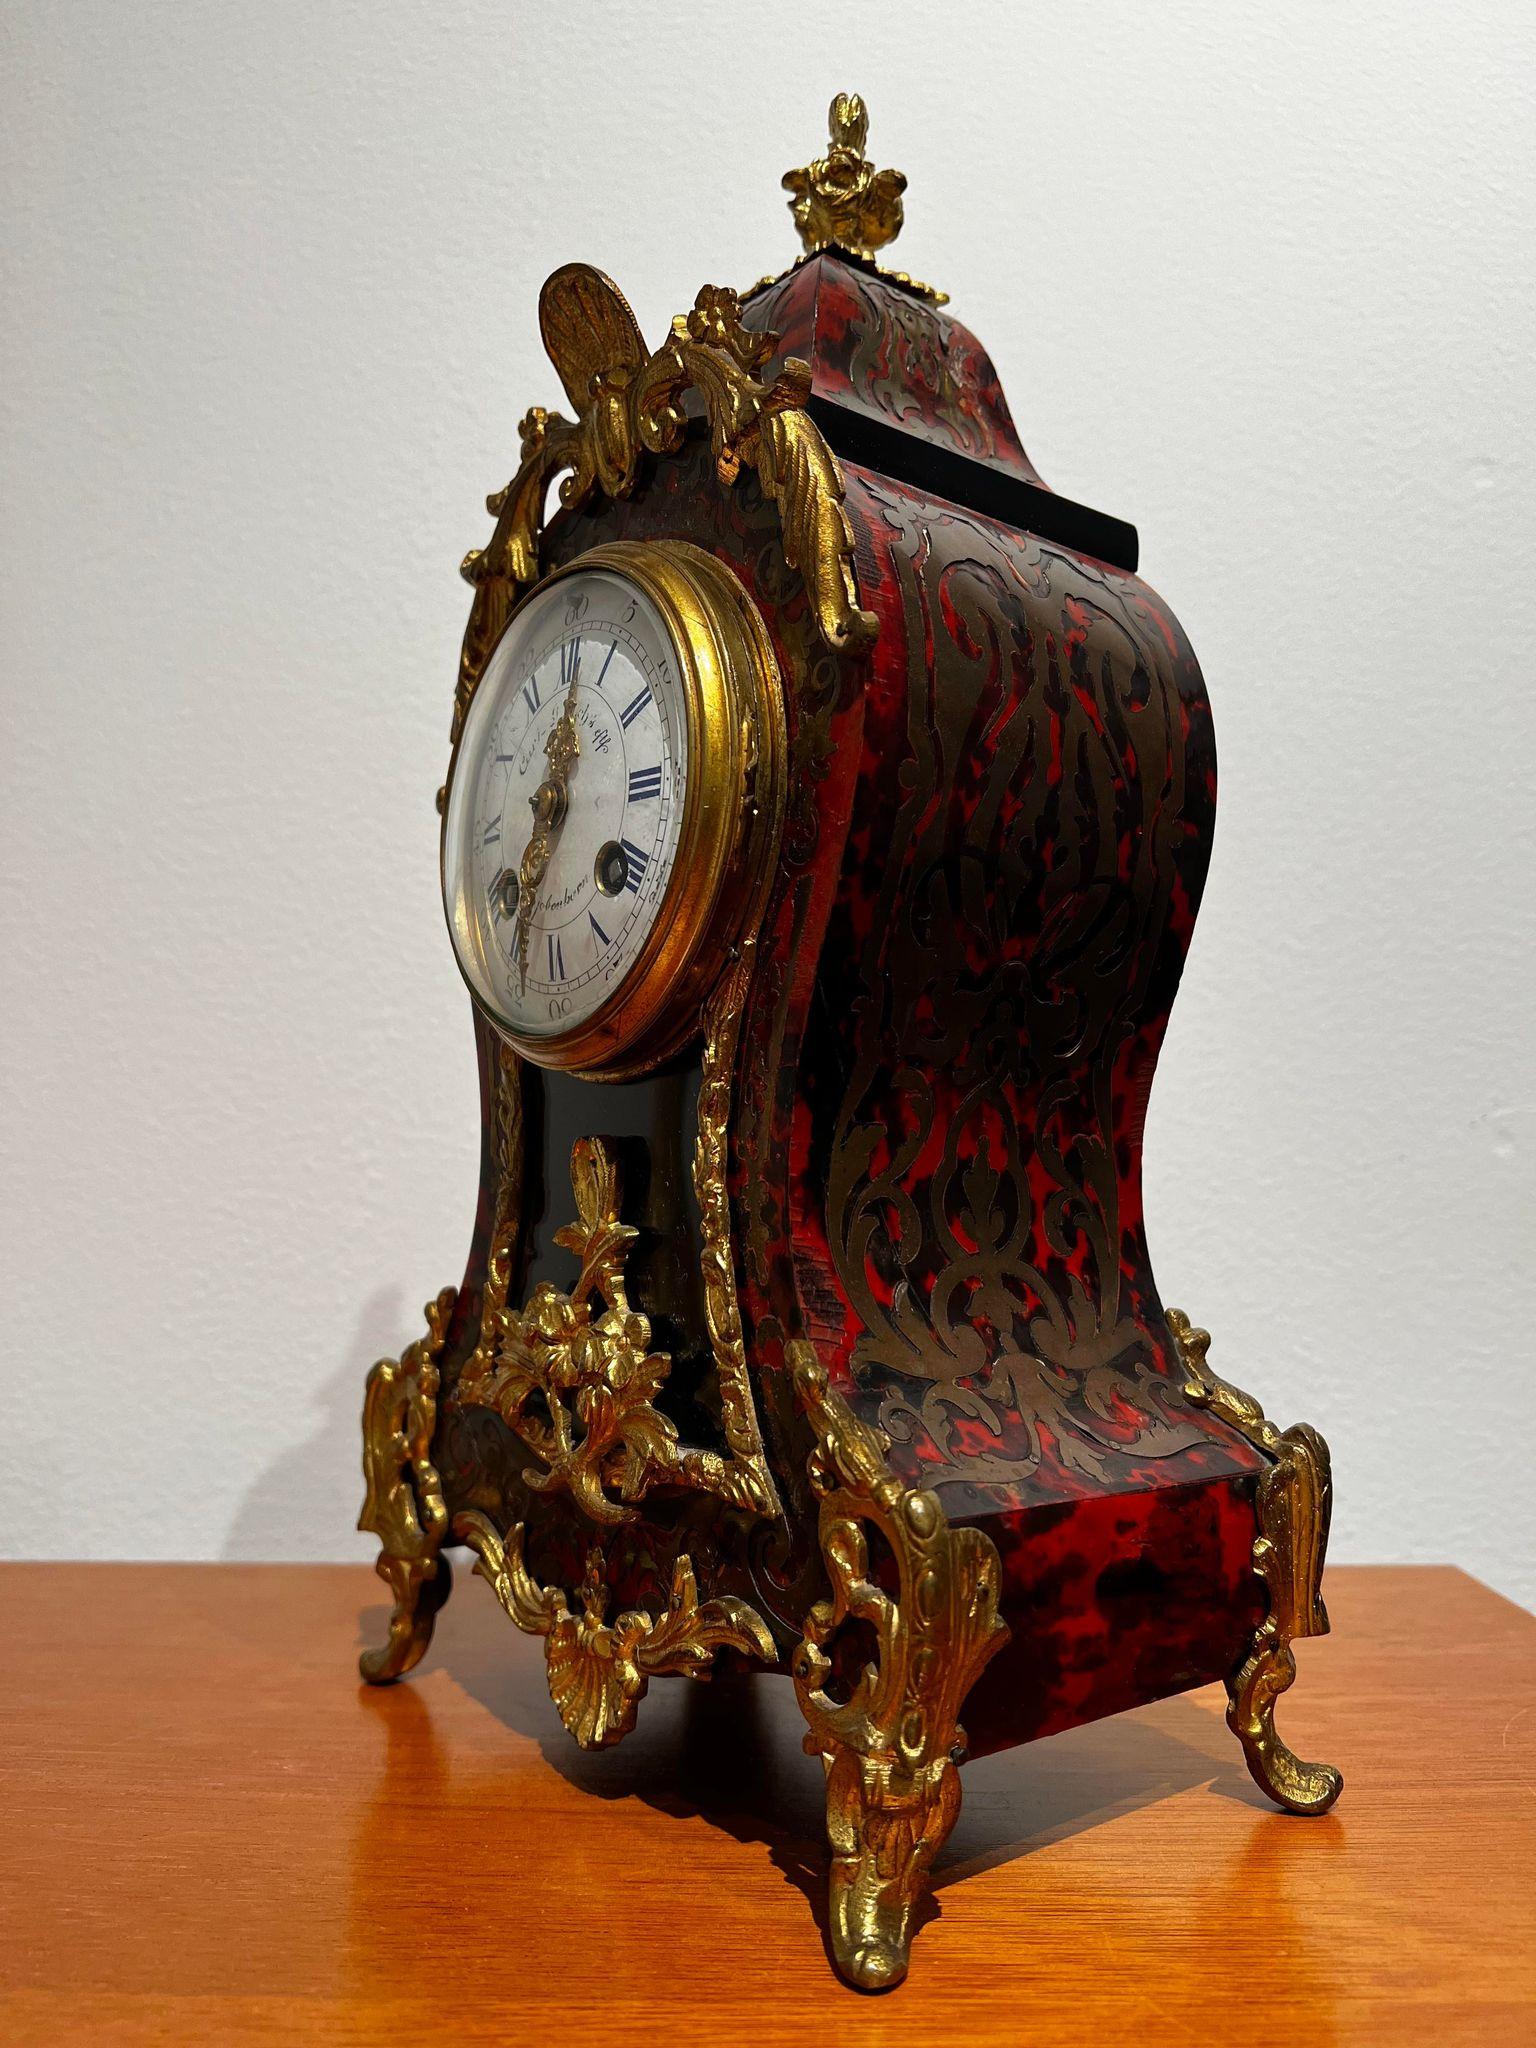 Carl Ranch's eff. Small antique mantel clock is a beautiful and unique clock that was made in France in the 1850s. The case is made in Rococo Rivival style with a inlaid tortoiseshell with brass, and the clock shows Roman and Arabic numerals. The